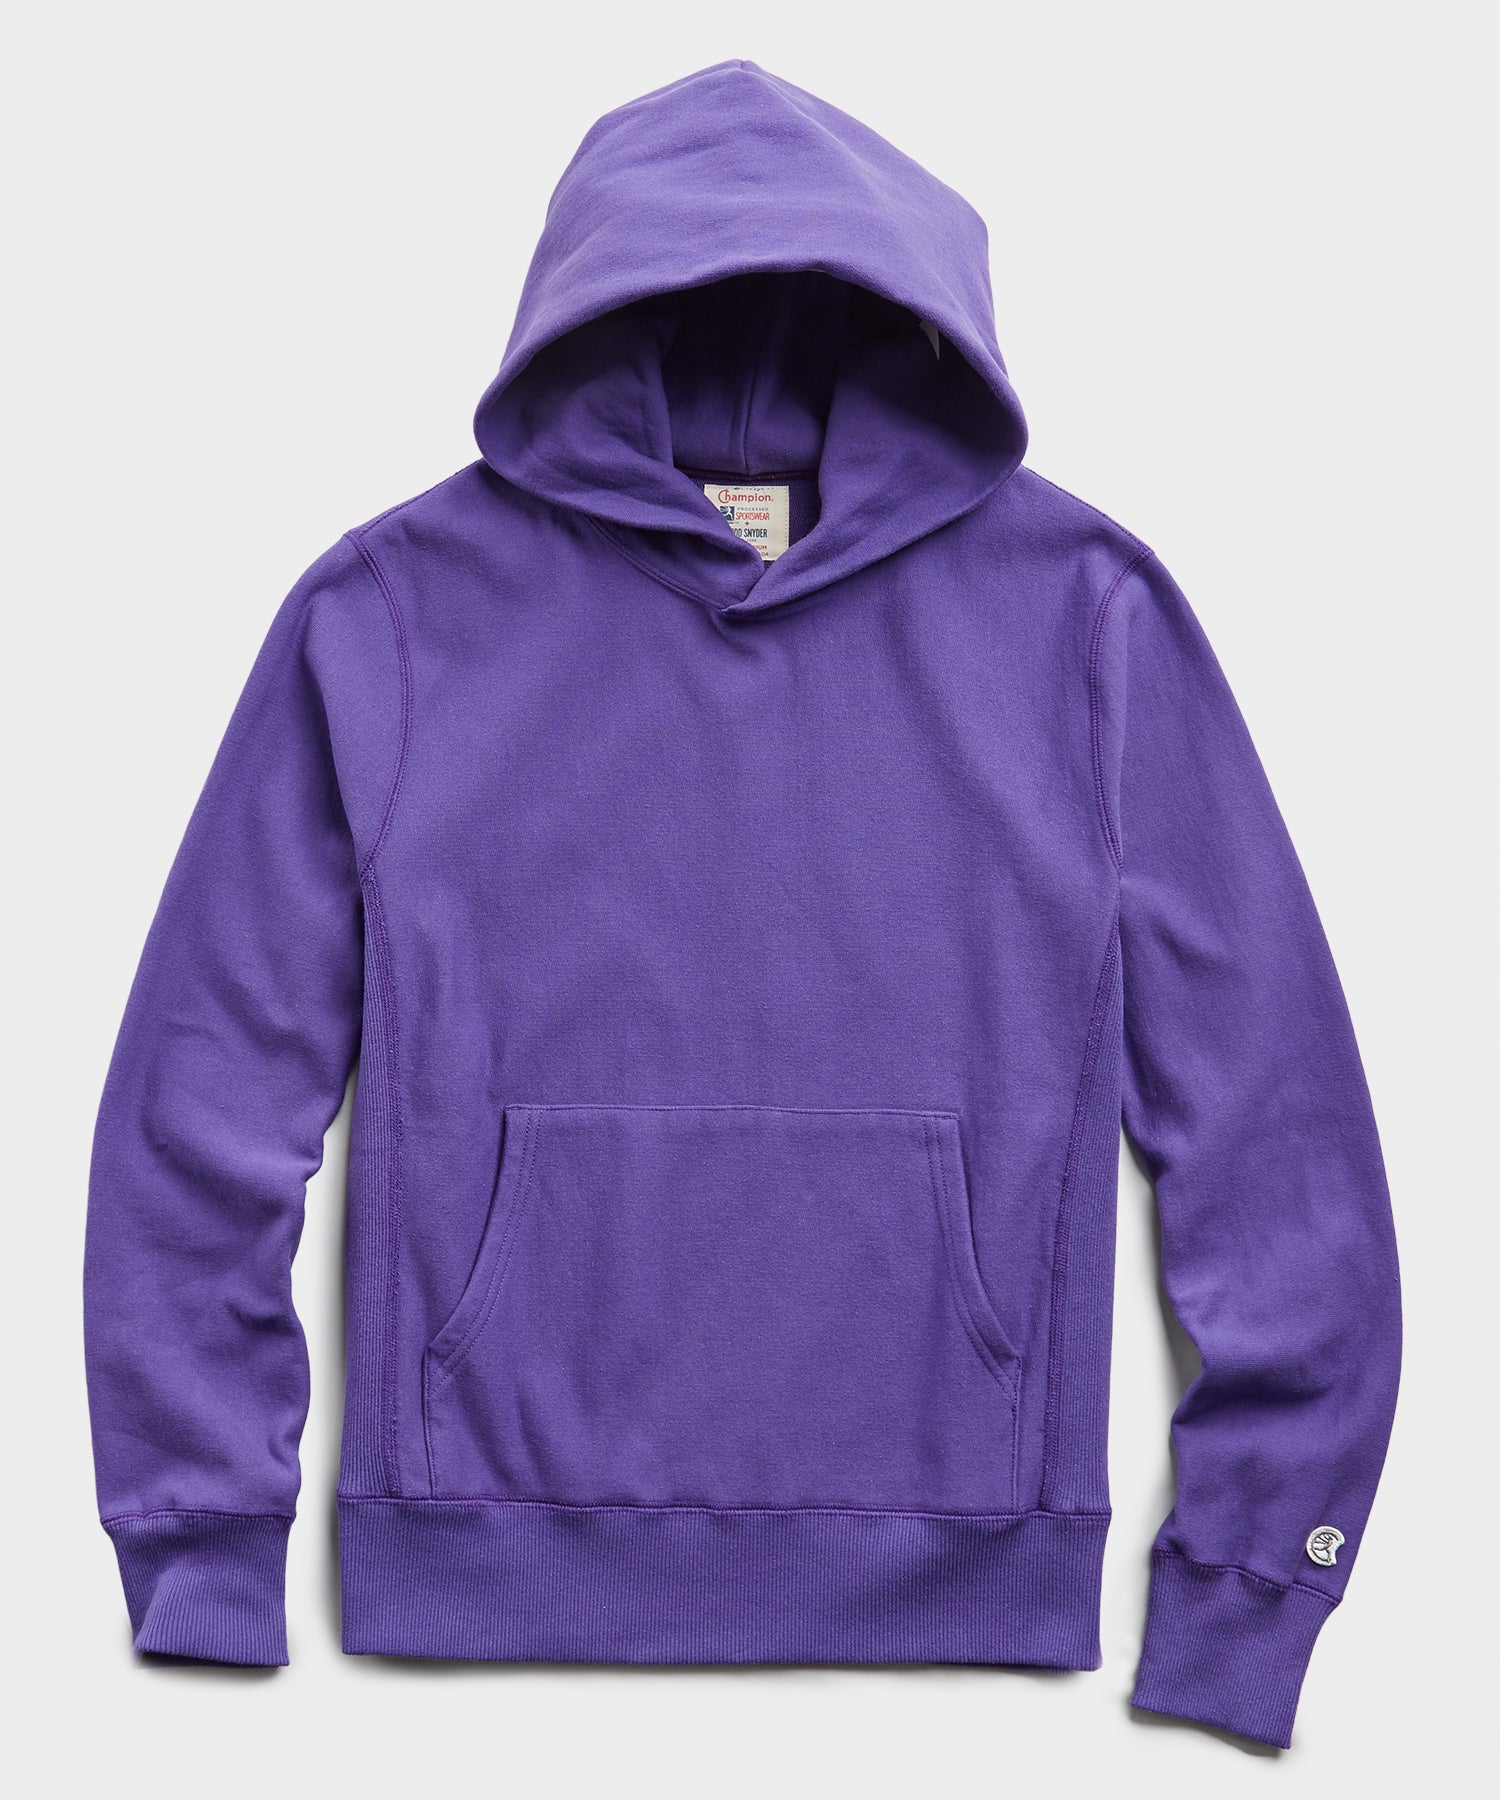 todd snyder hoodie